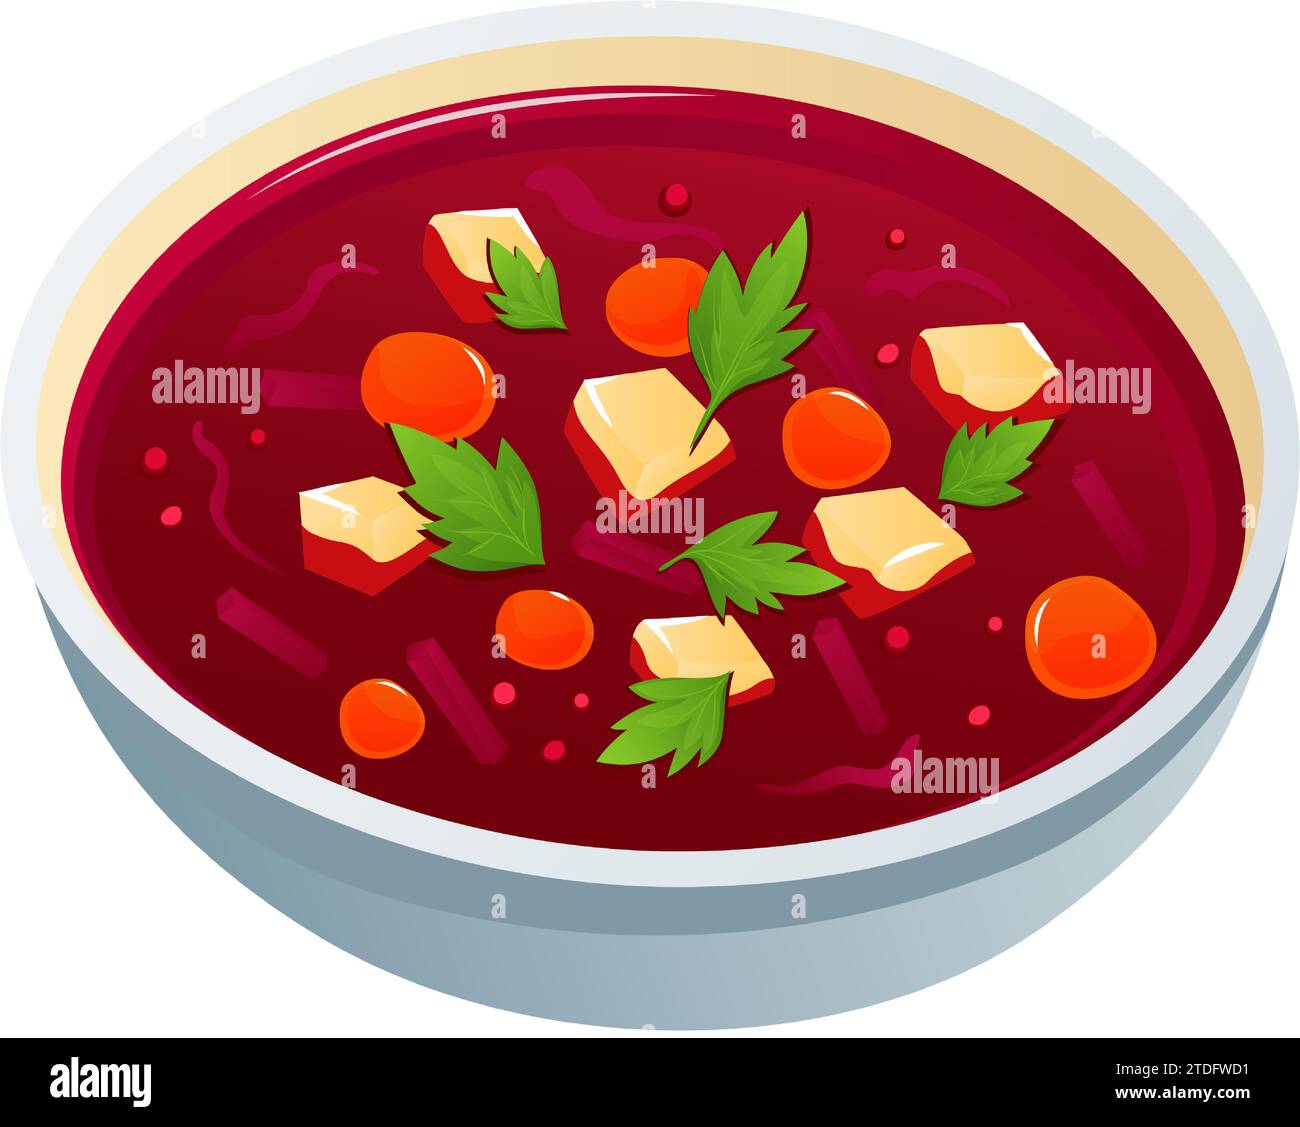 National Ukrainian dish borscht in a plate. Red tomato soup with potatoes, meat, spices, carrots, beet, parsley. Symbol of Ukraine. Hot lunch. Vector Stock Vector